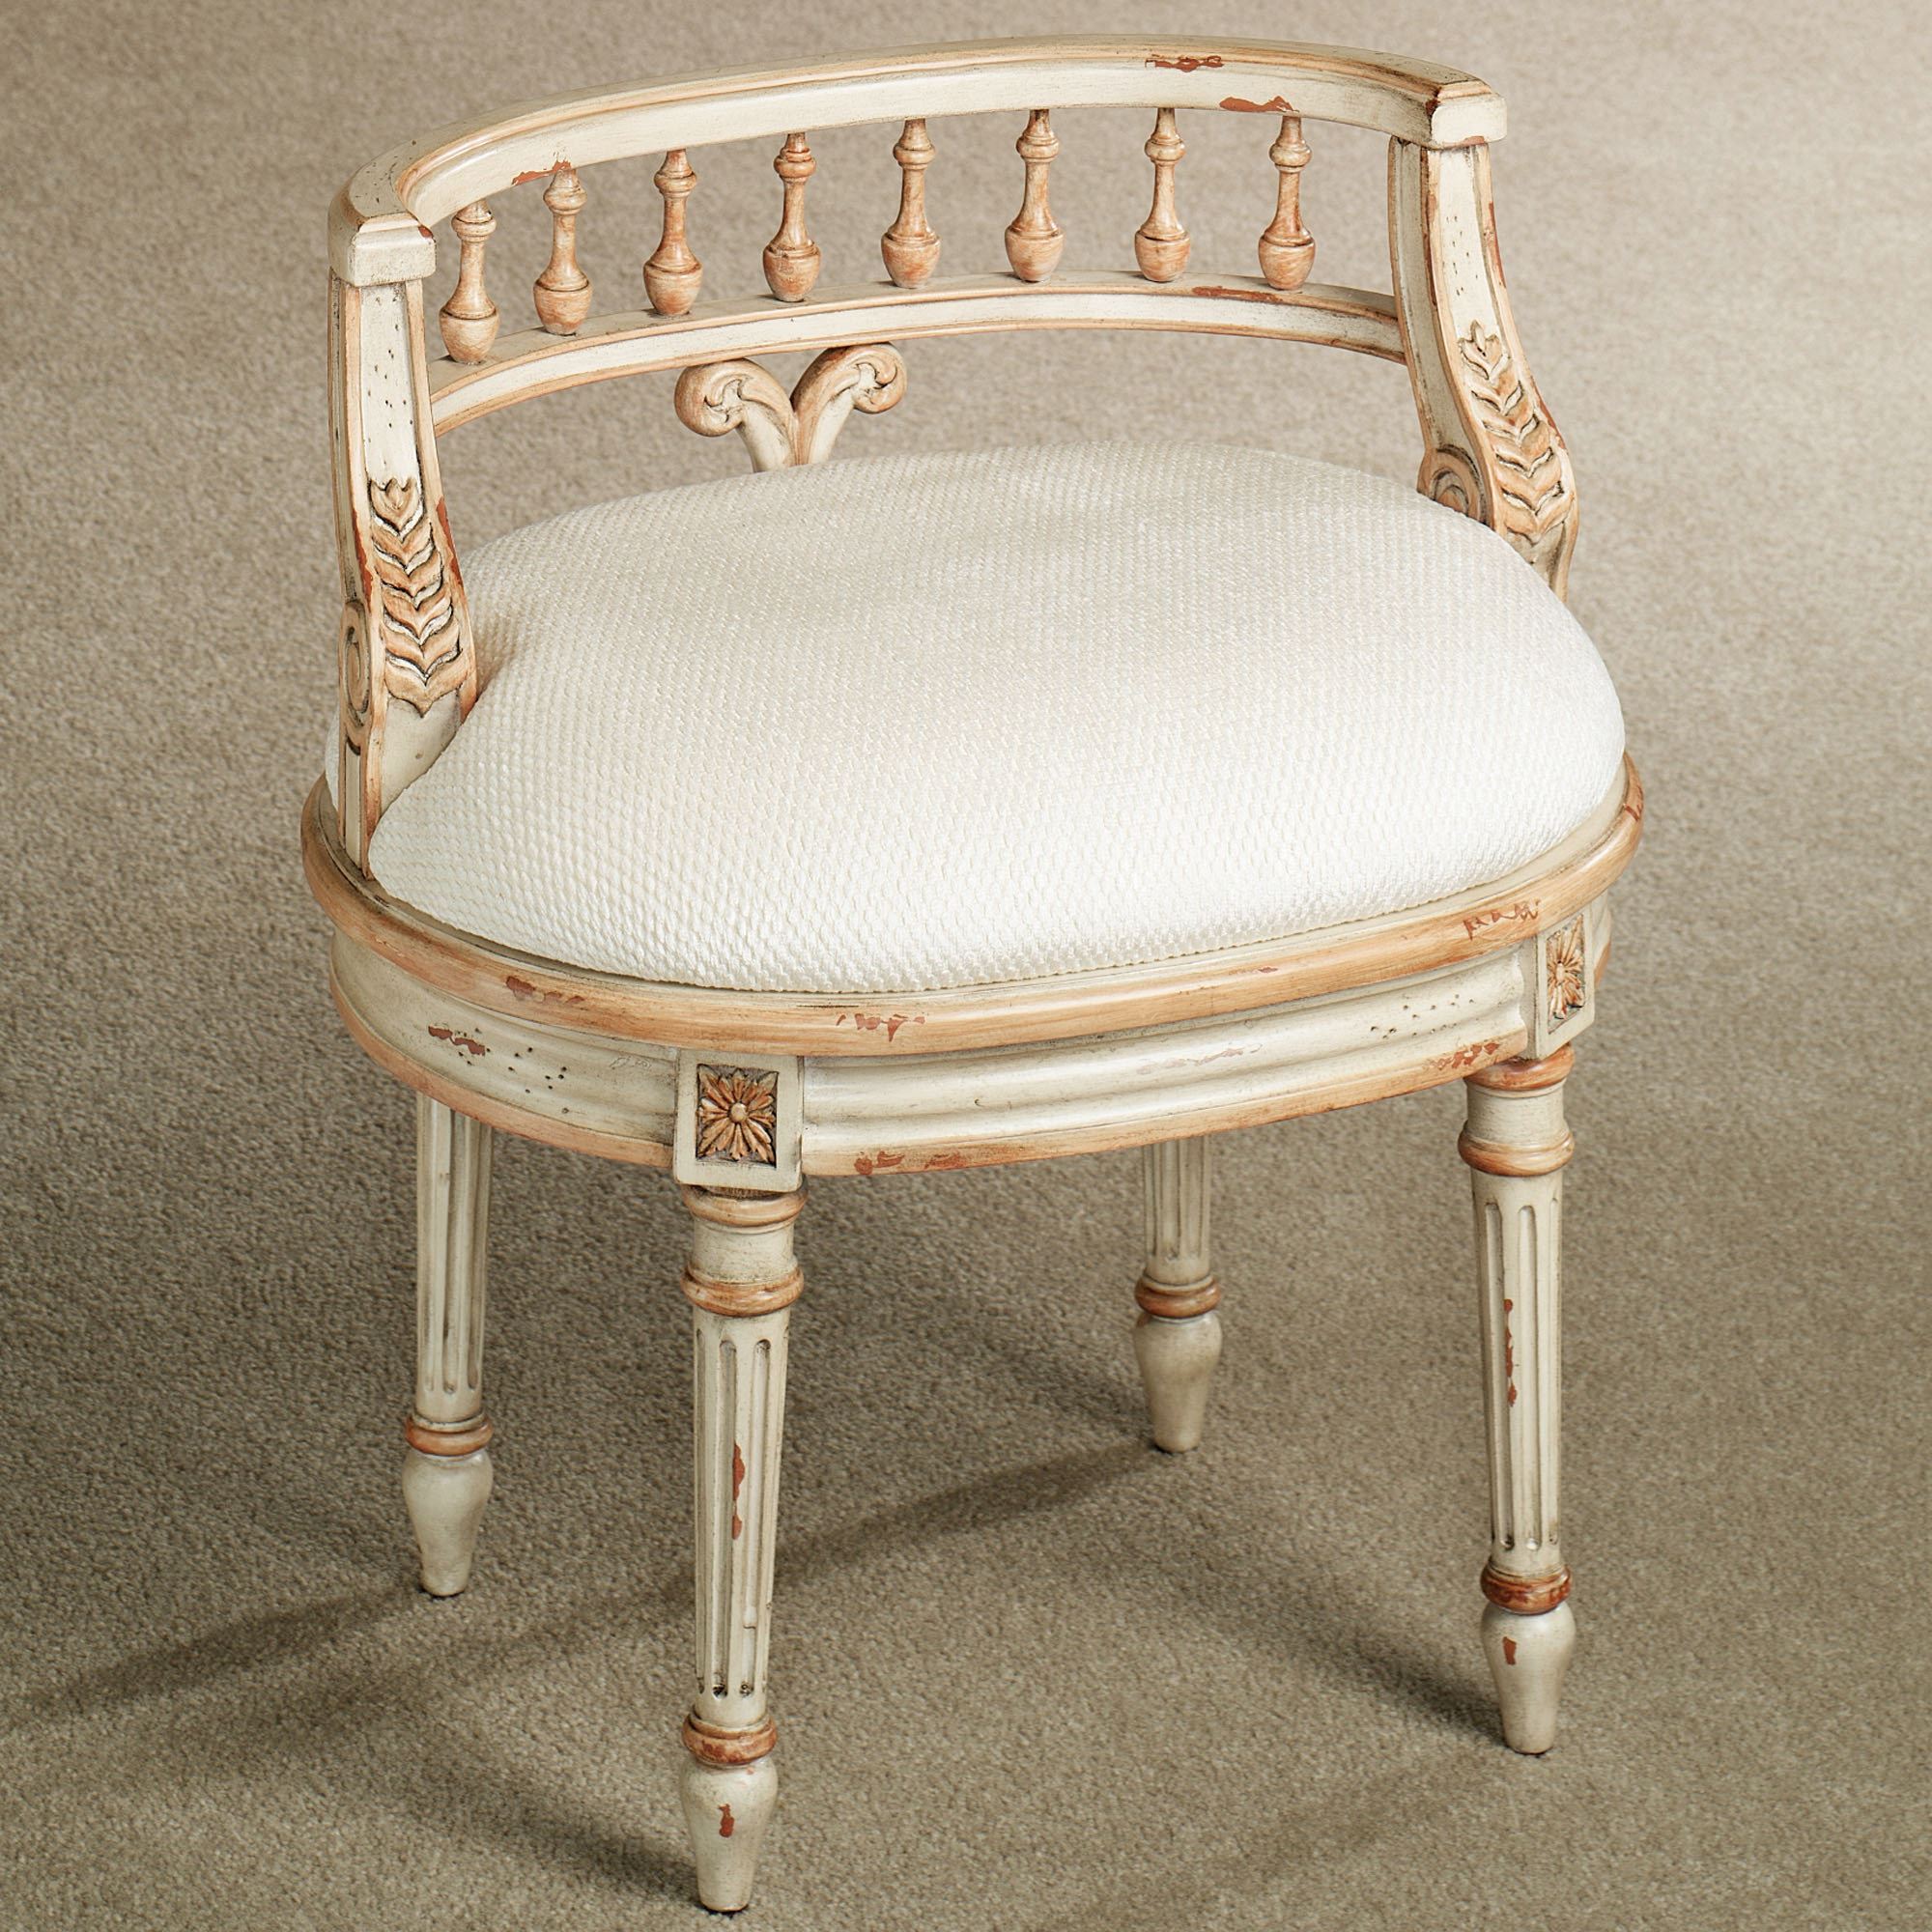 queensley vanity chair antique ivory. click to expand YXDLSLZ